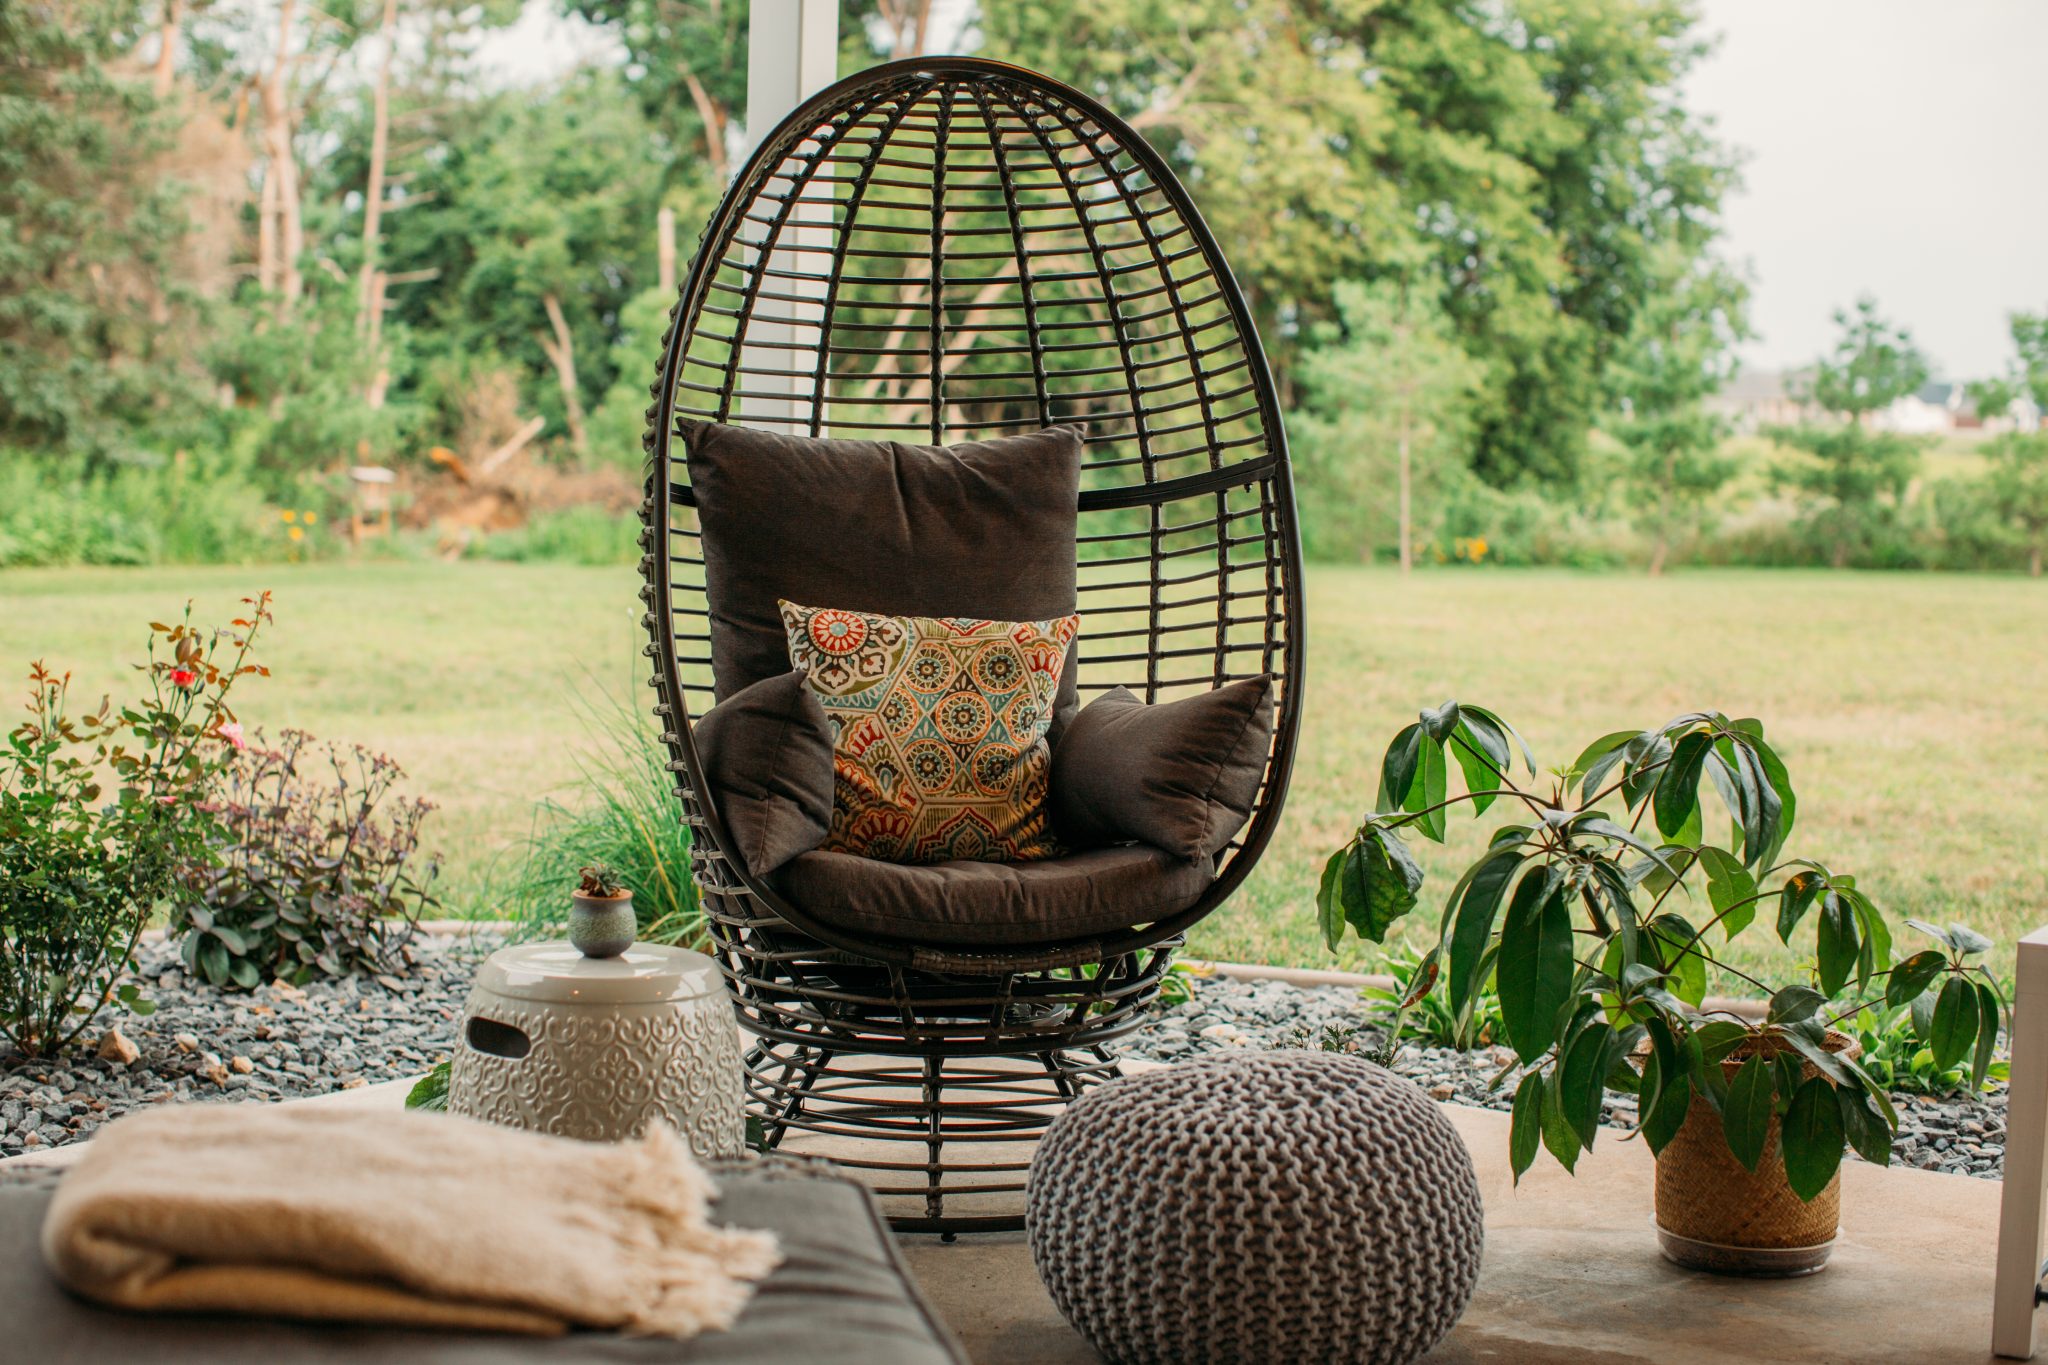 Grey egg chair with pouf ottoman in a cozy boho chic outdoor living space